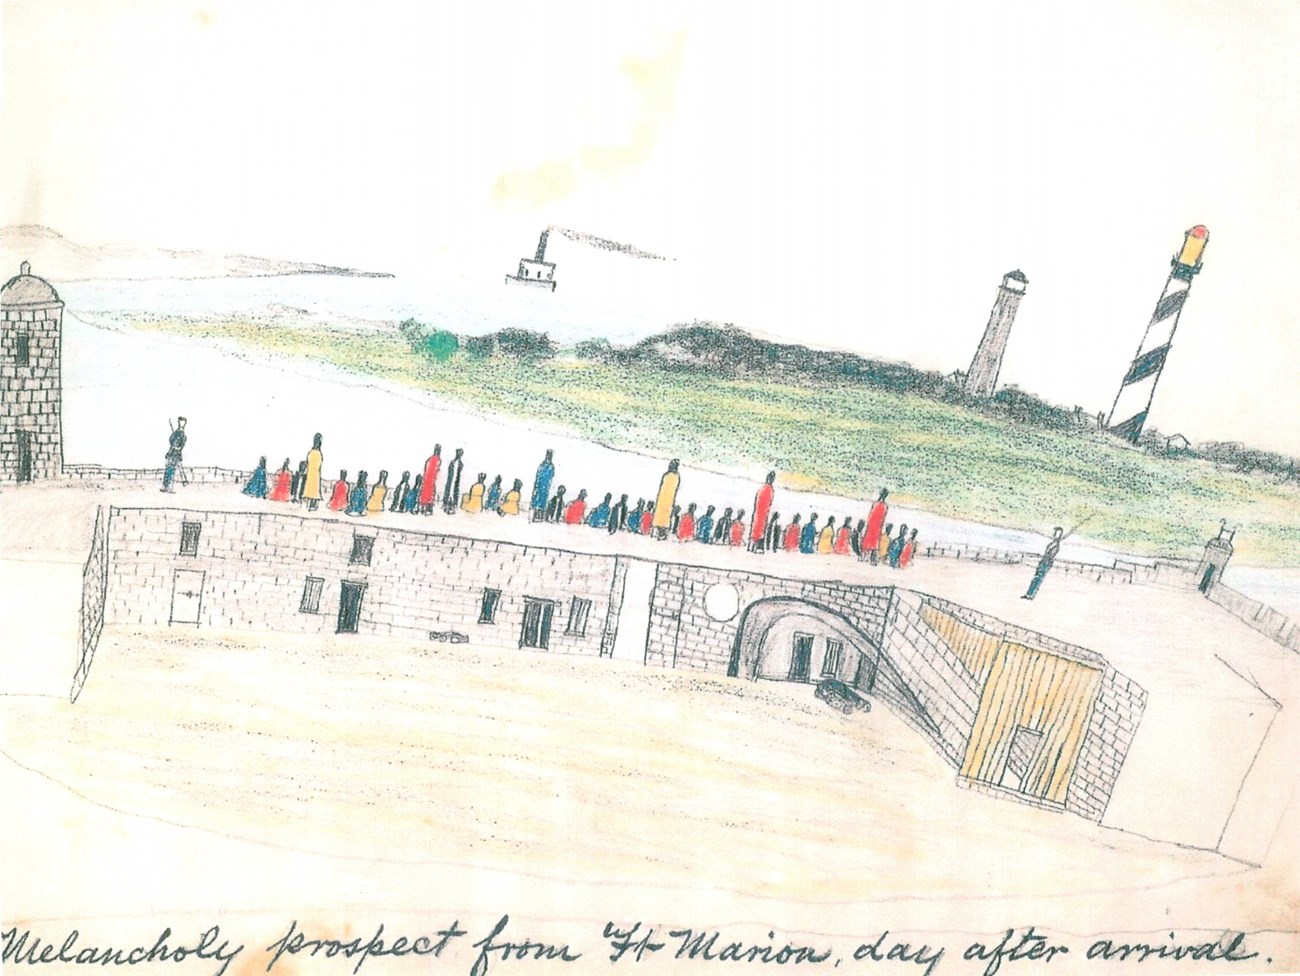 A drawing of Plains Indian prisoners on the Castillo's gundeck, looking towards the water.